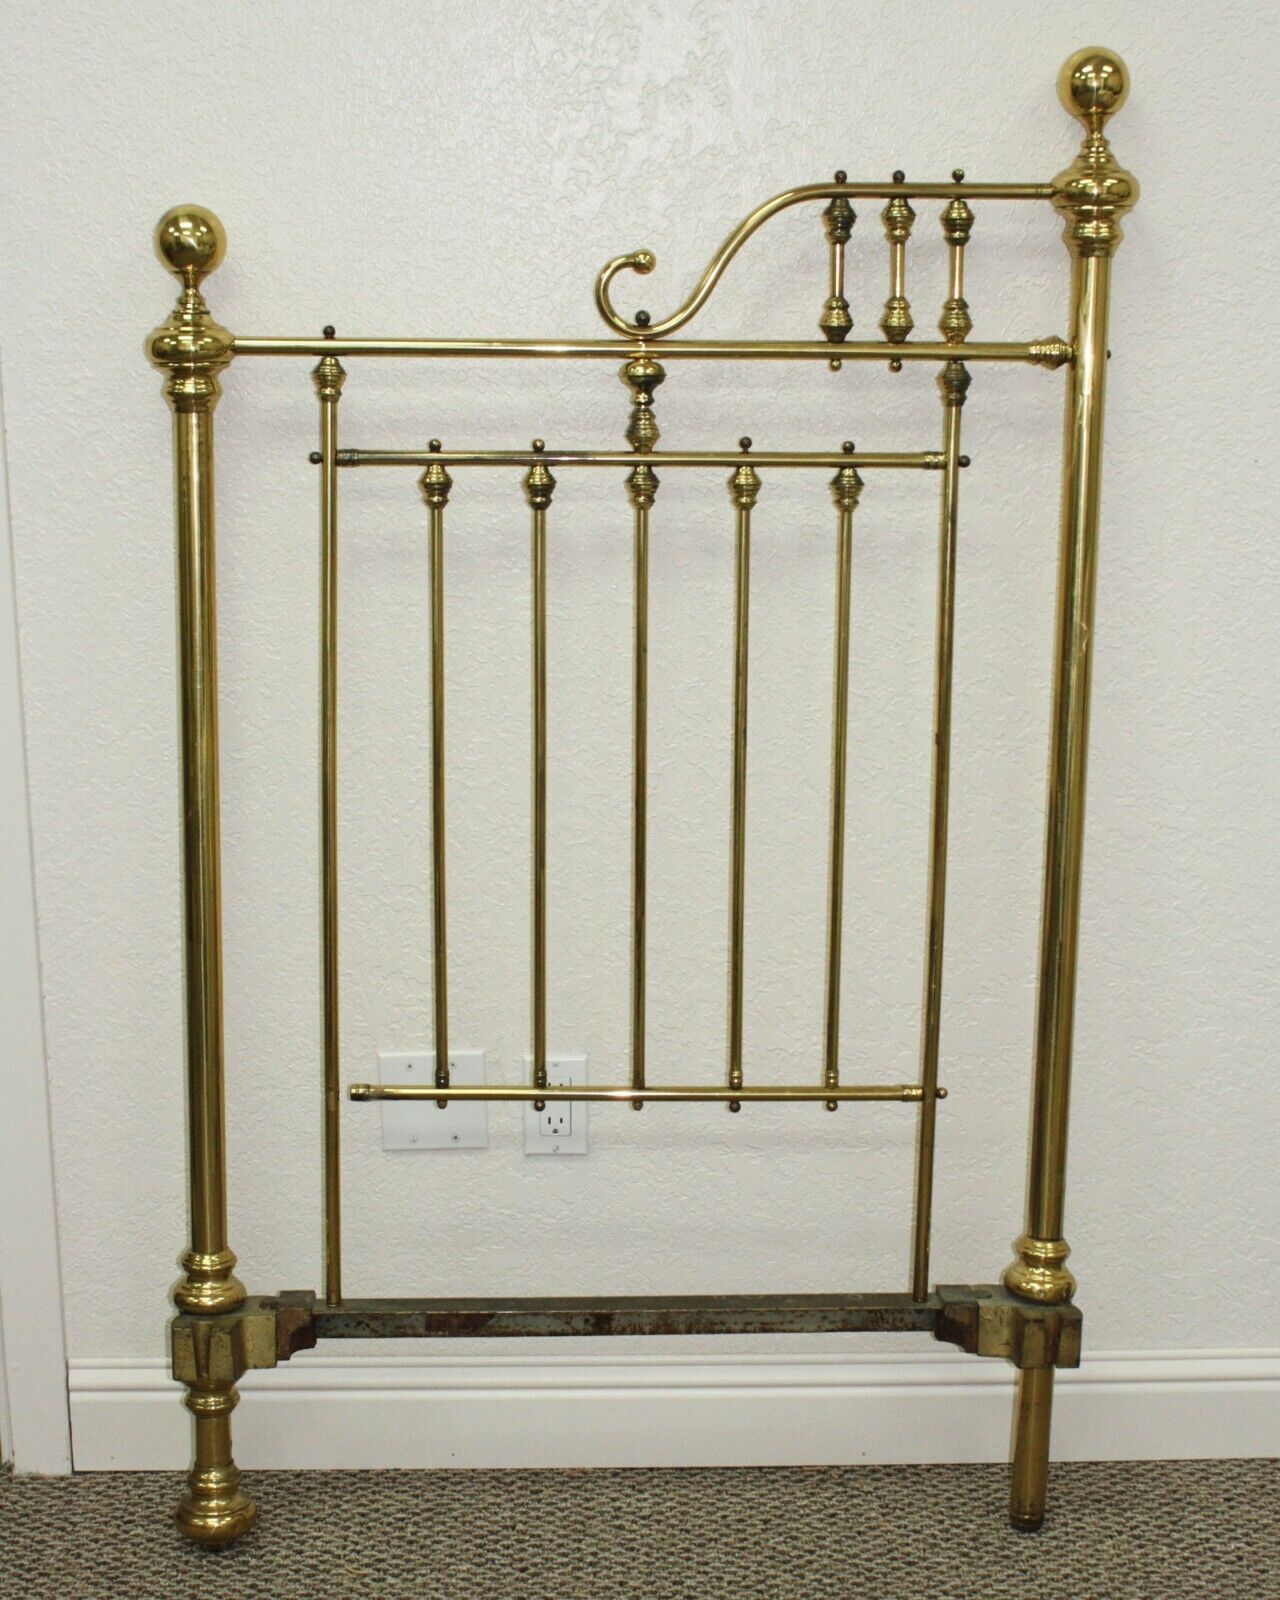 EXTREMELY RARE ANTIQUE PR OF VICTORIAN BRASS TWIN 3/4 BEDS THAT MAKE INTO A KING Без бренда - фотография #4